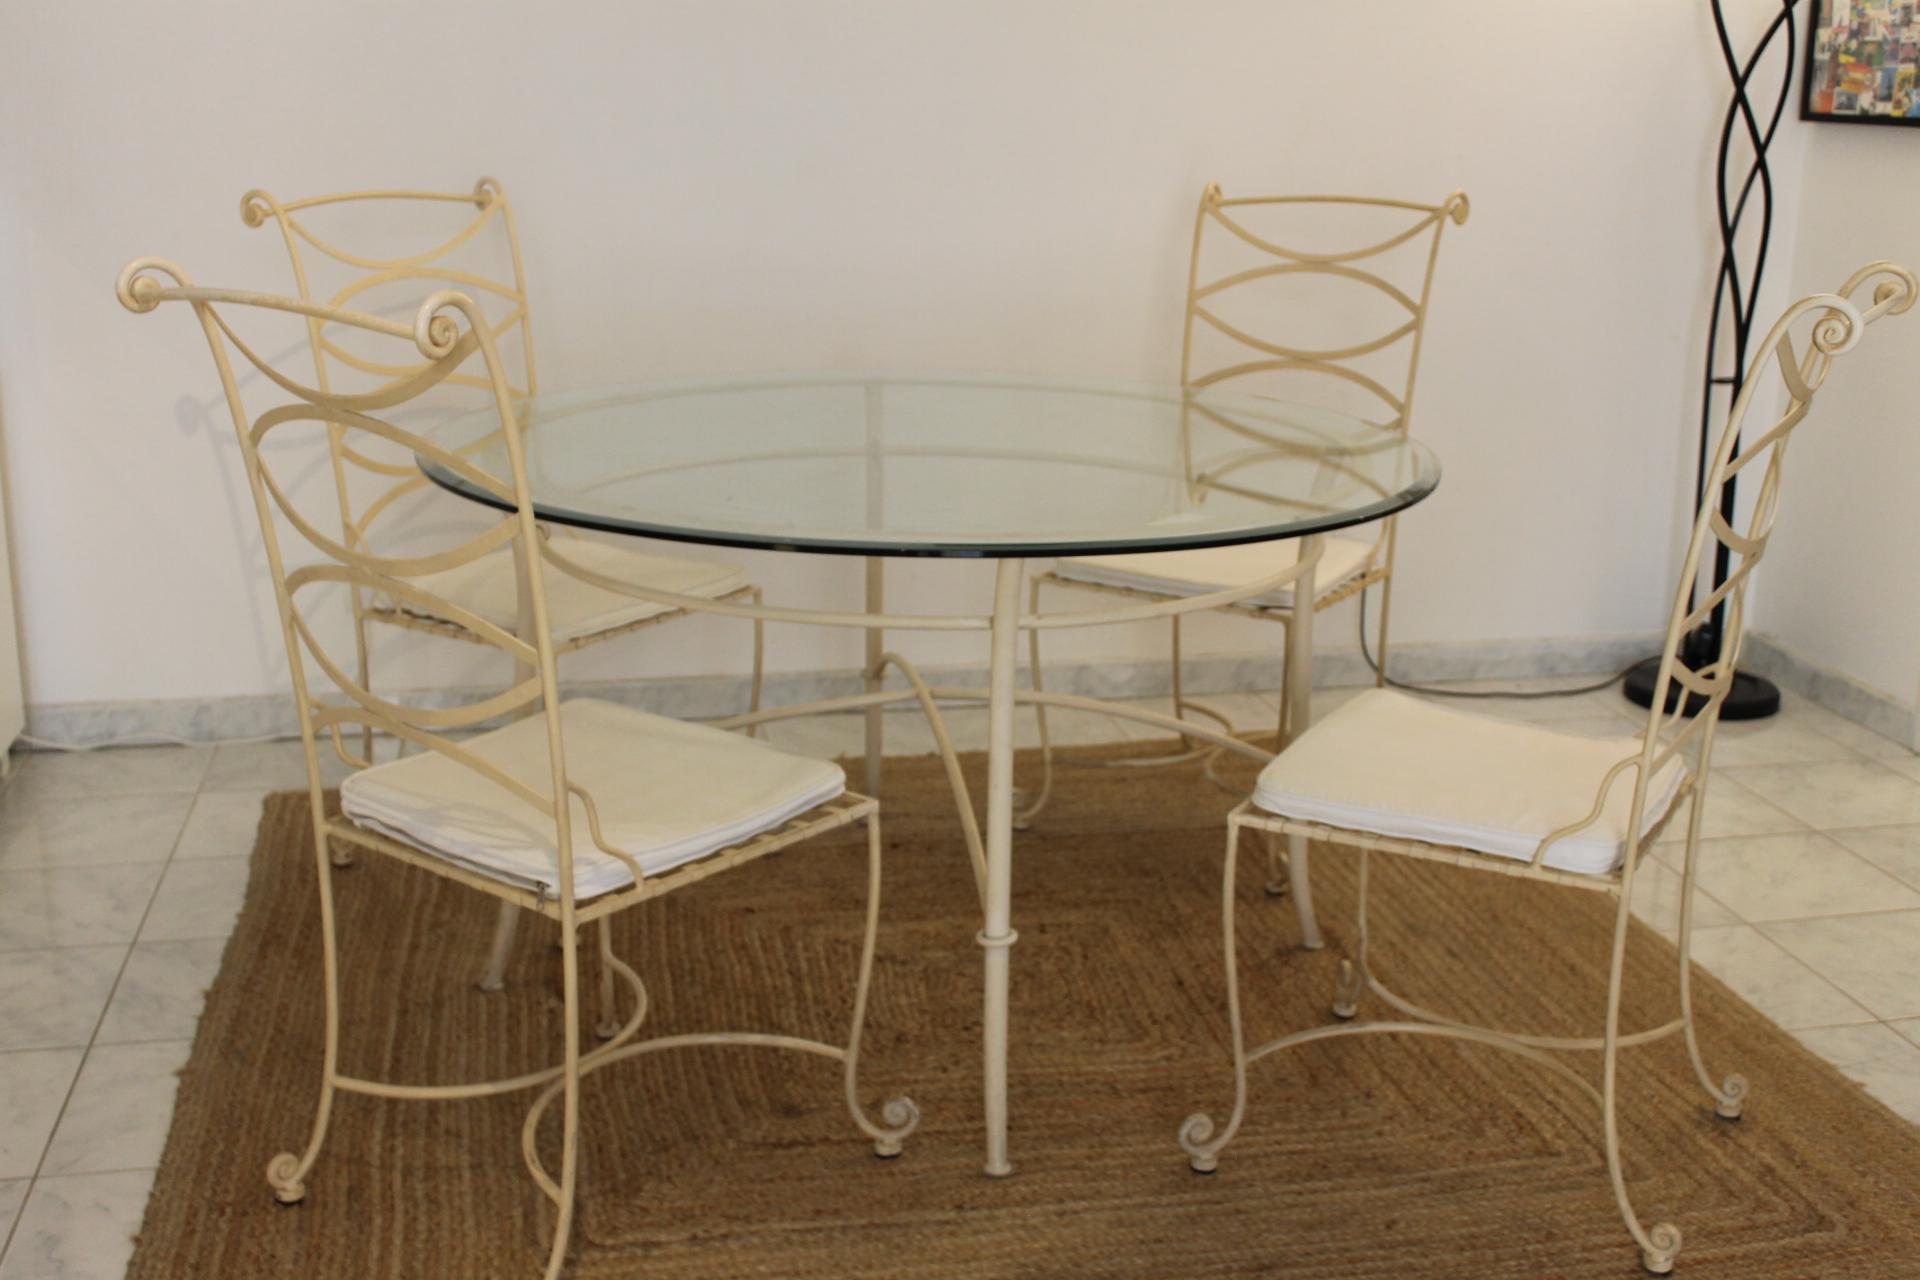 Belle Époque Dining Table, 4 Chairs, Wrought Iron, 1980 For Sale